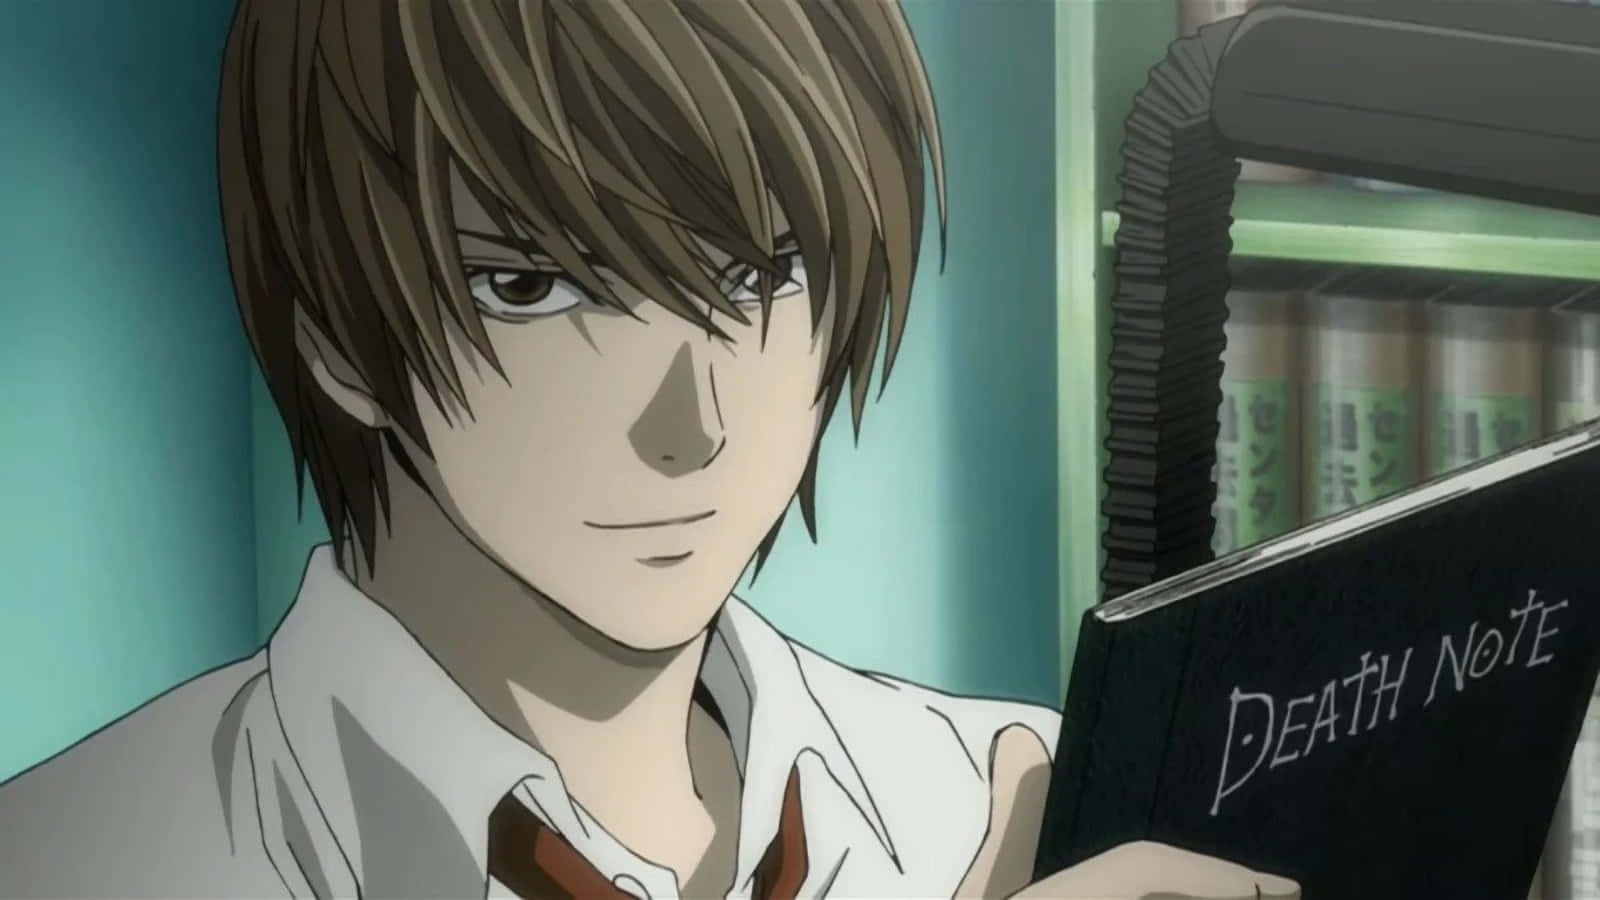 "Light Yagami’s quest on fulfilling his own justice with the help of Shinigamis and a supernatural notebook called ‘Death Note’”